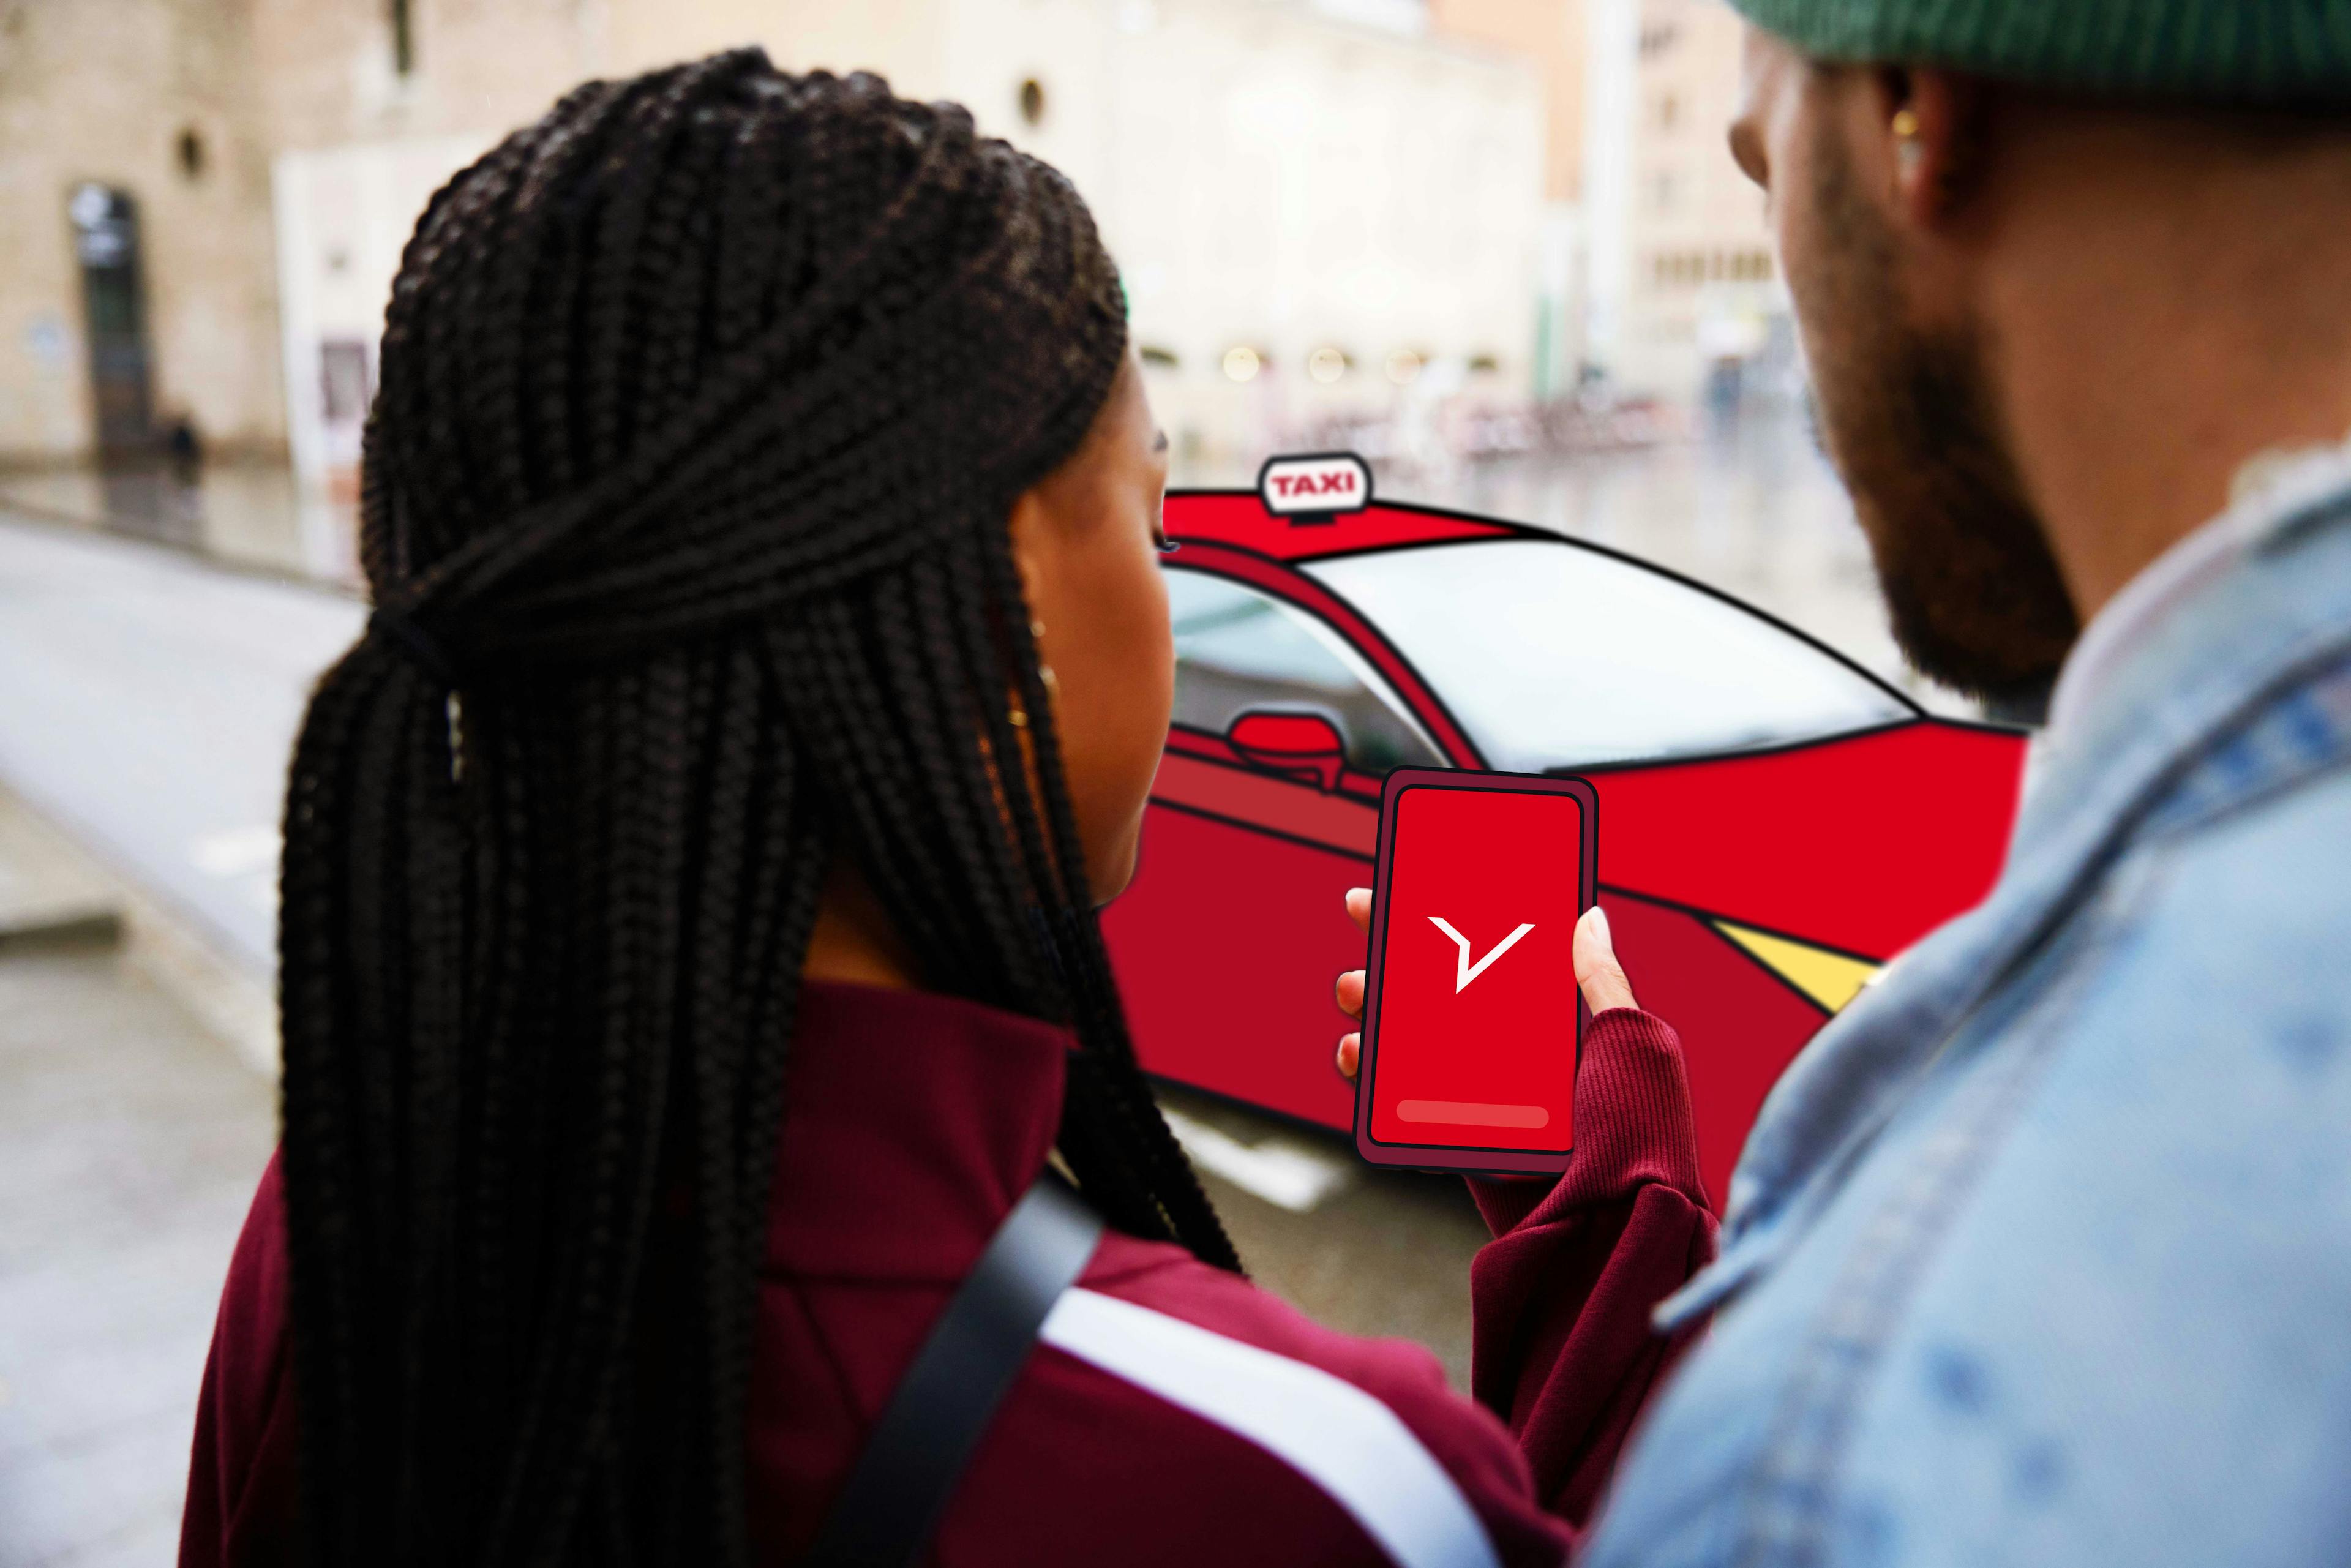 Two people looking at mobile with FREENOW logo and red taxi in the background